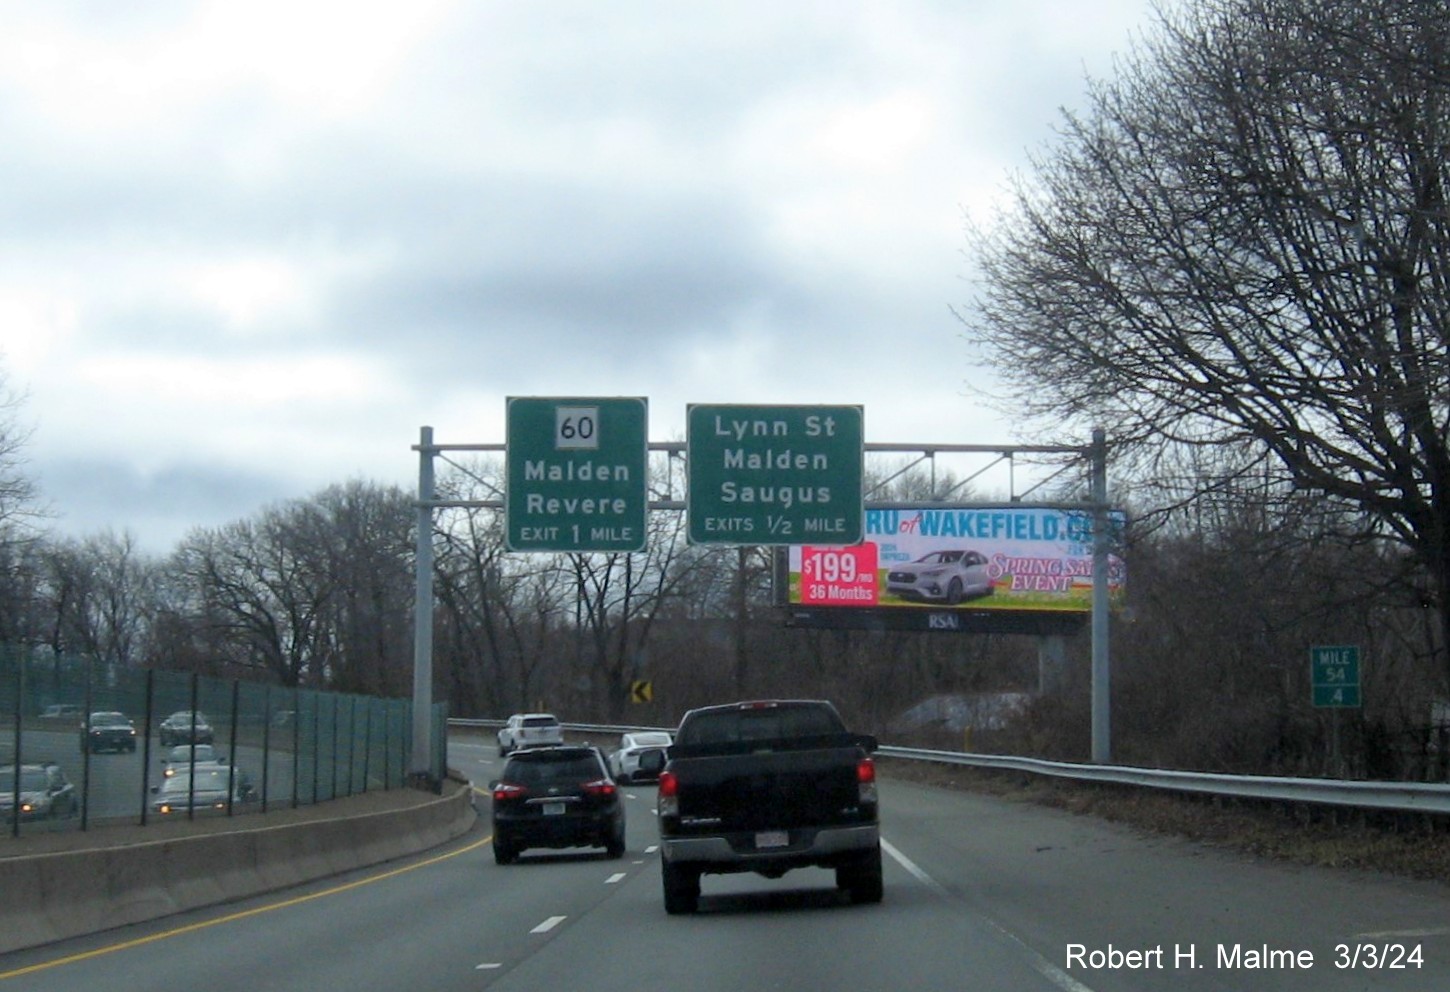 Image of recently placed overhead advance signs for MA 60 and Lynn Street exits on US 1 South in Malden, March 2024